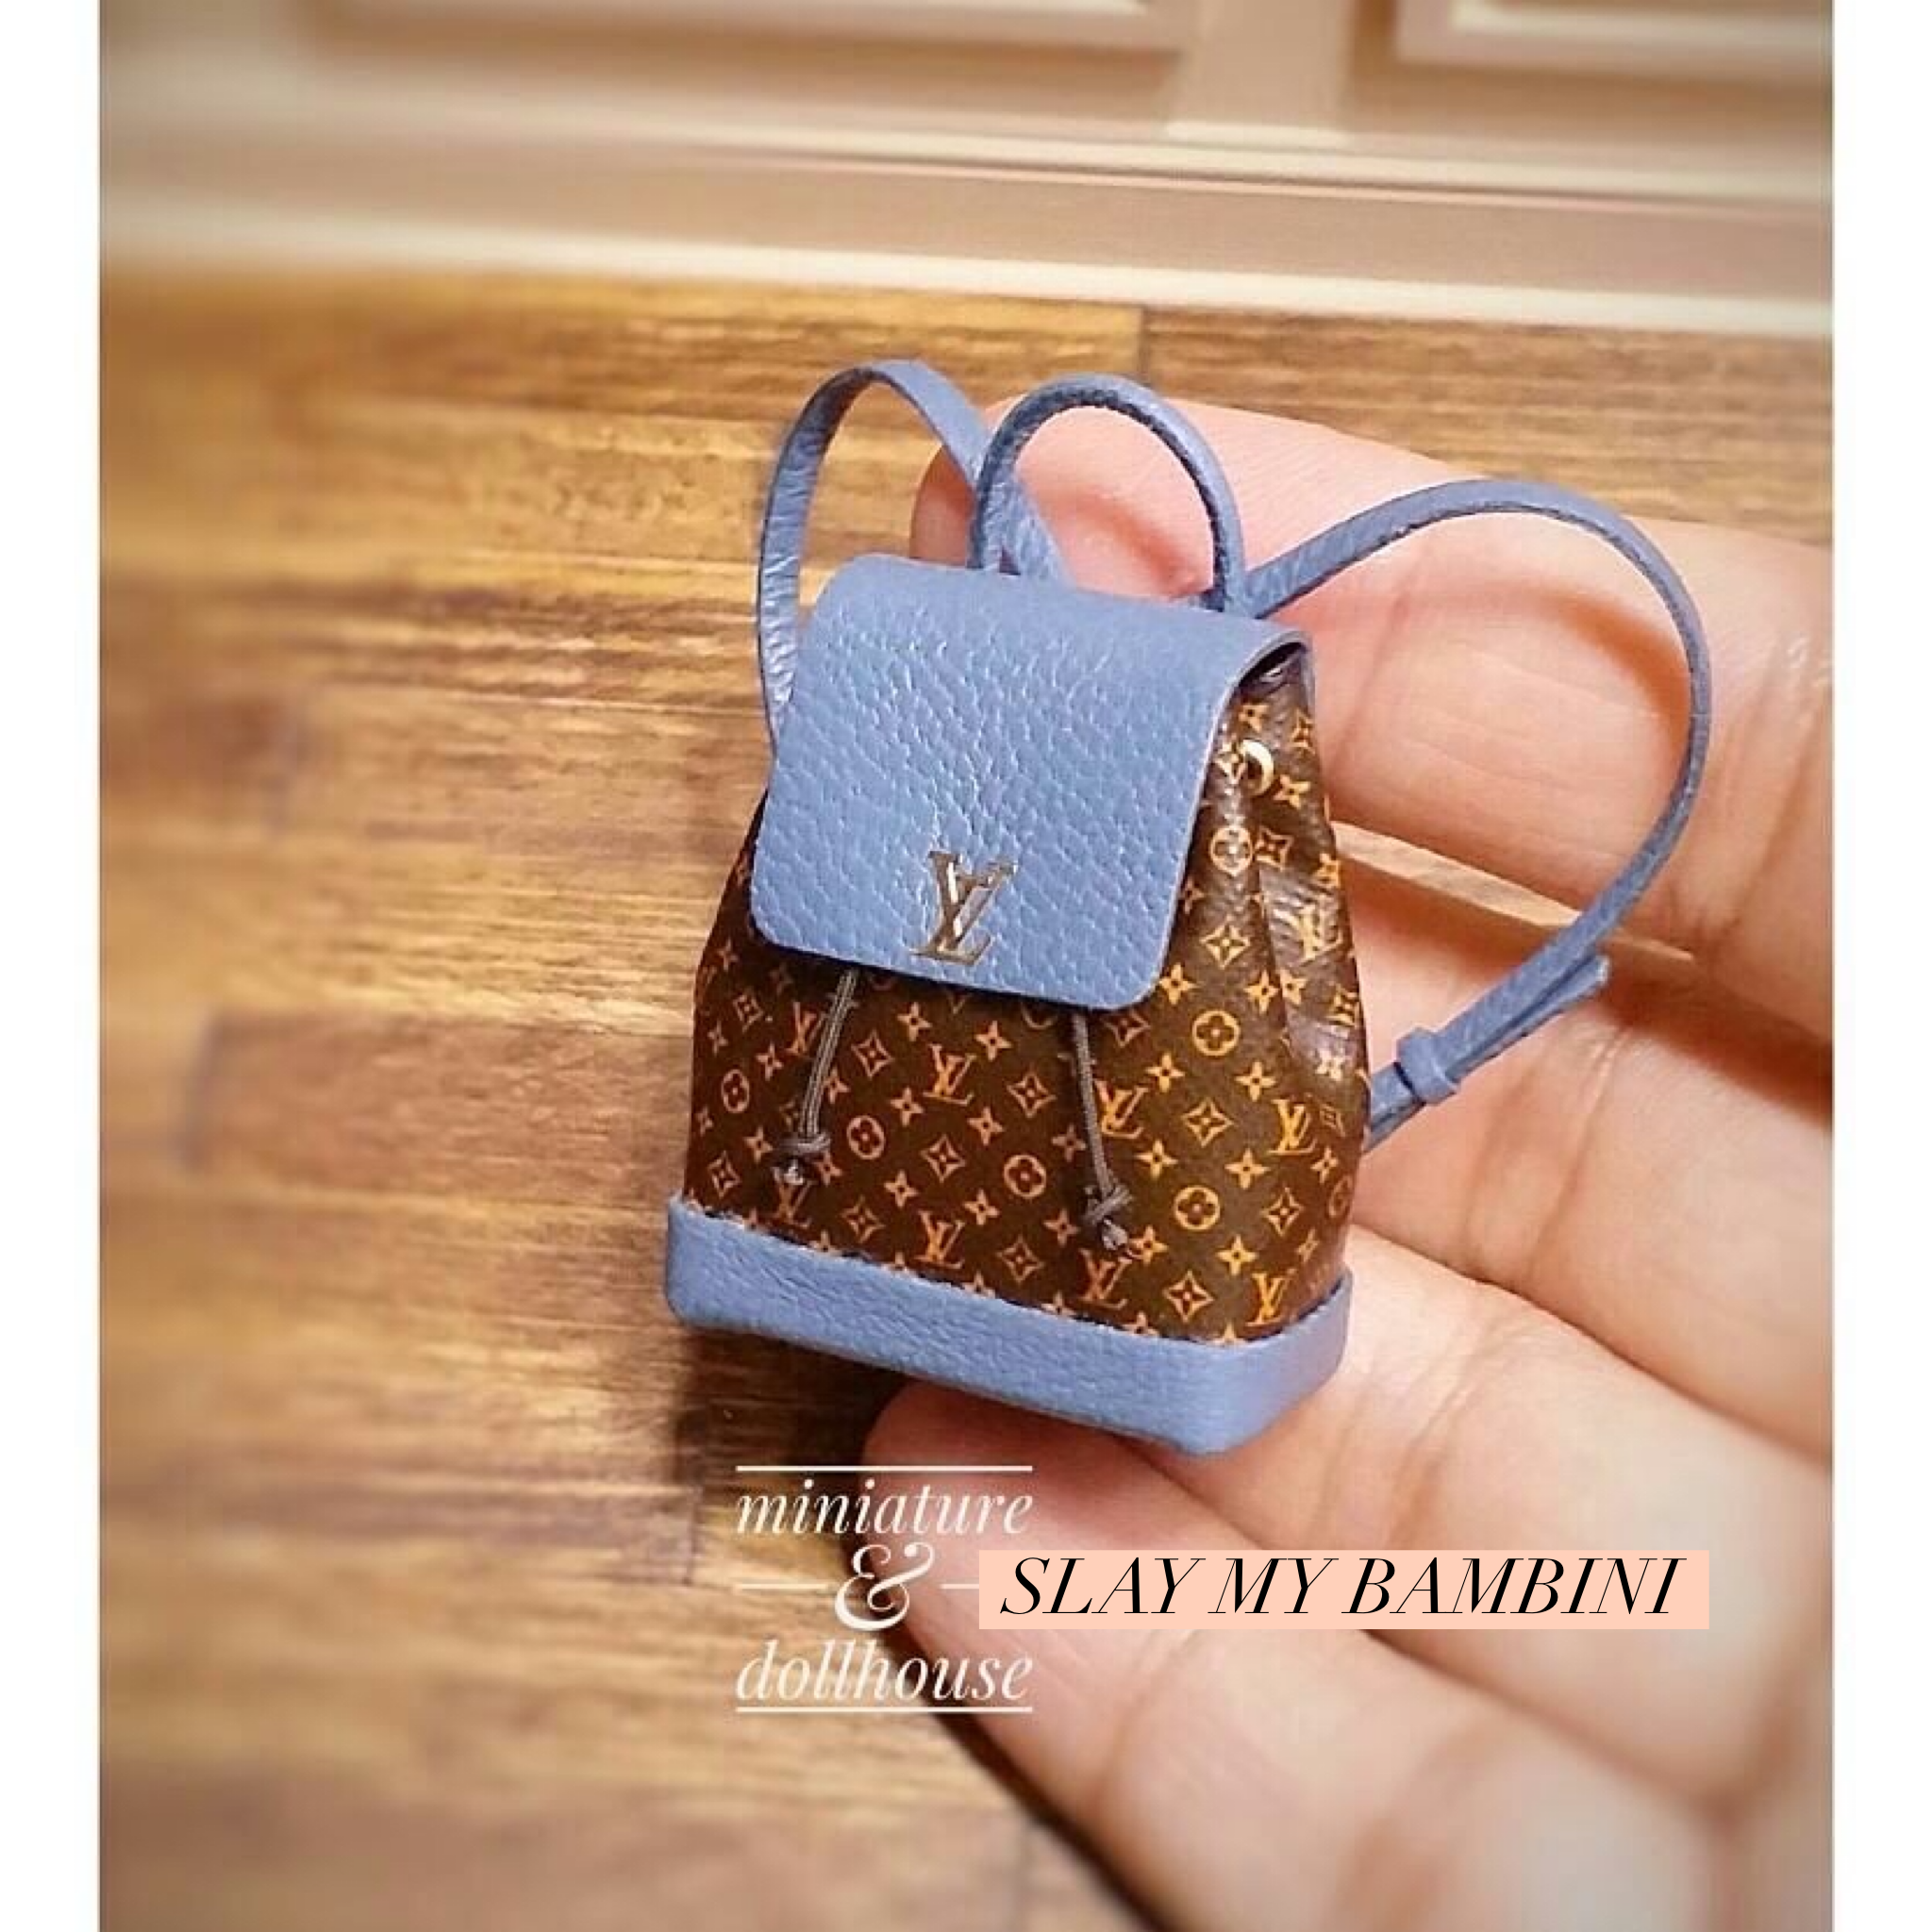 Exclusive miniature LV style doll bag - Slaylebrity